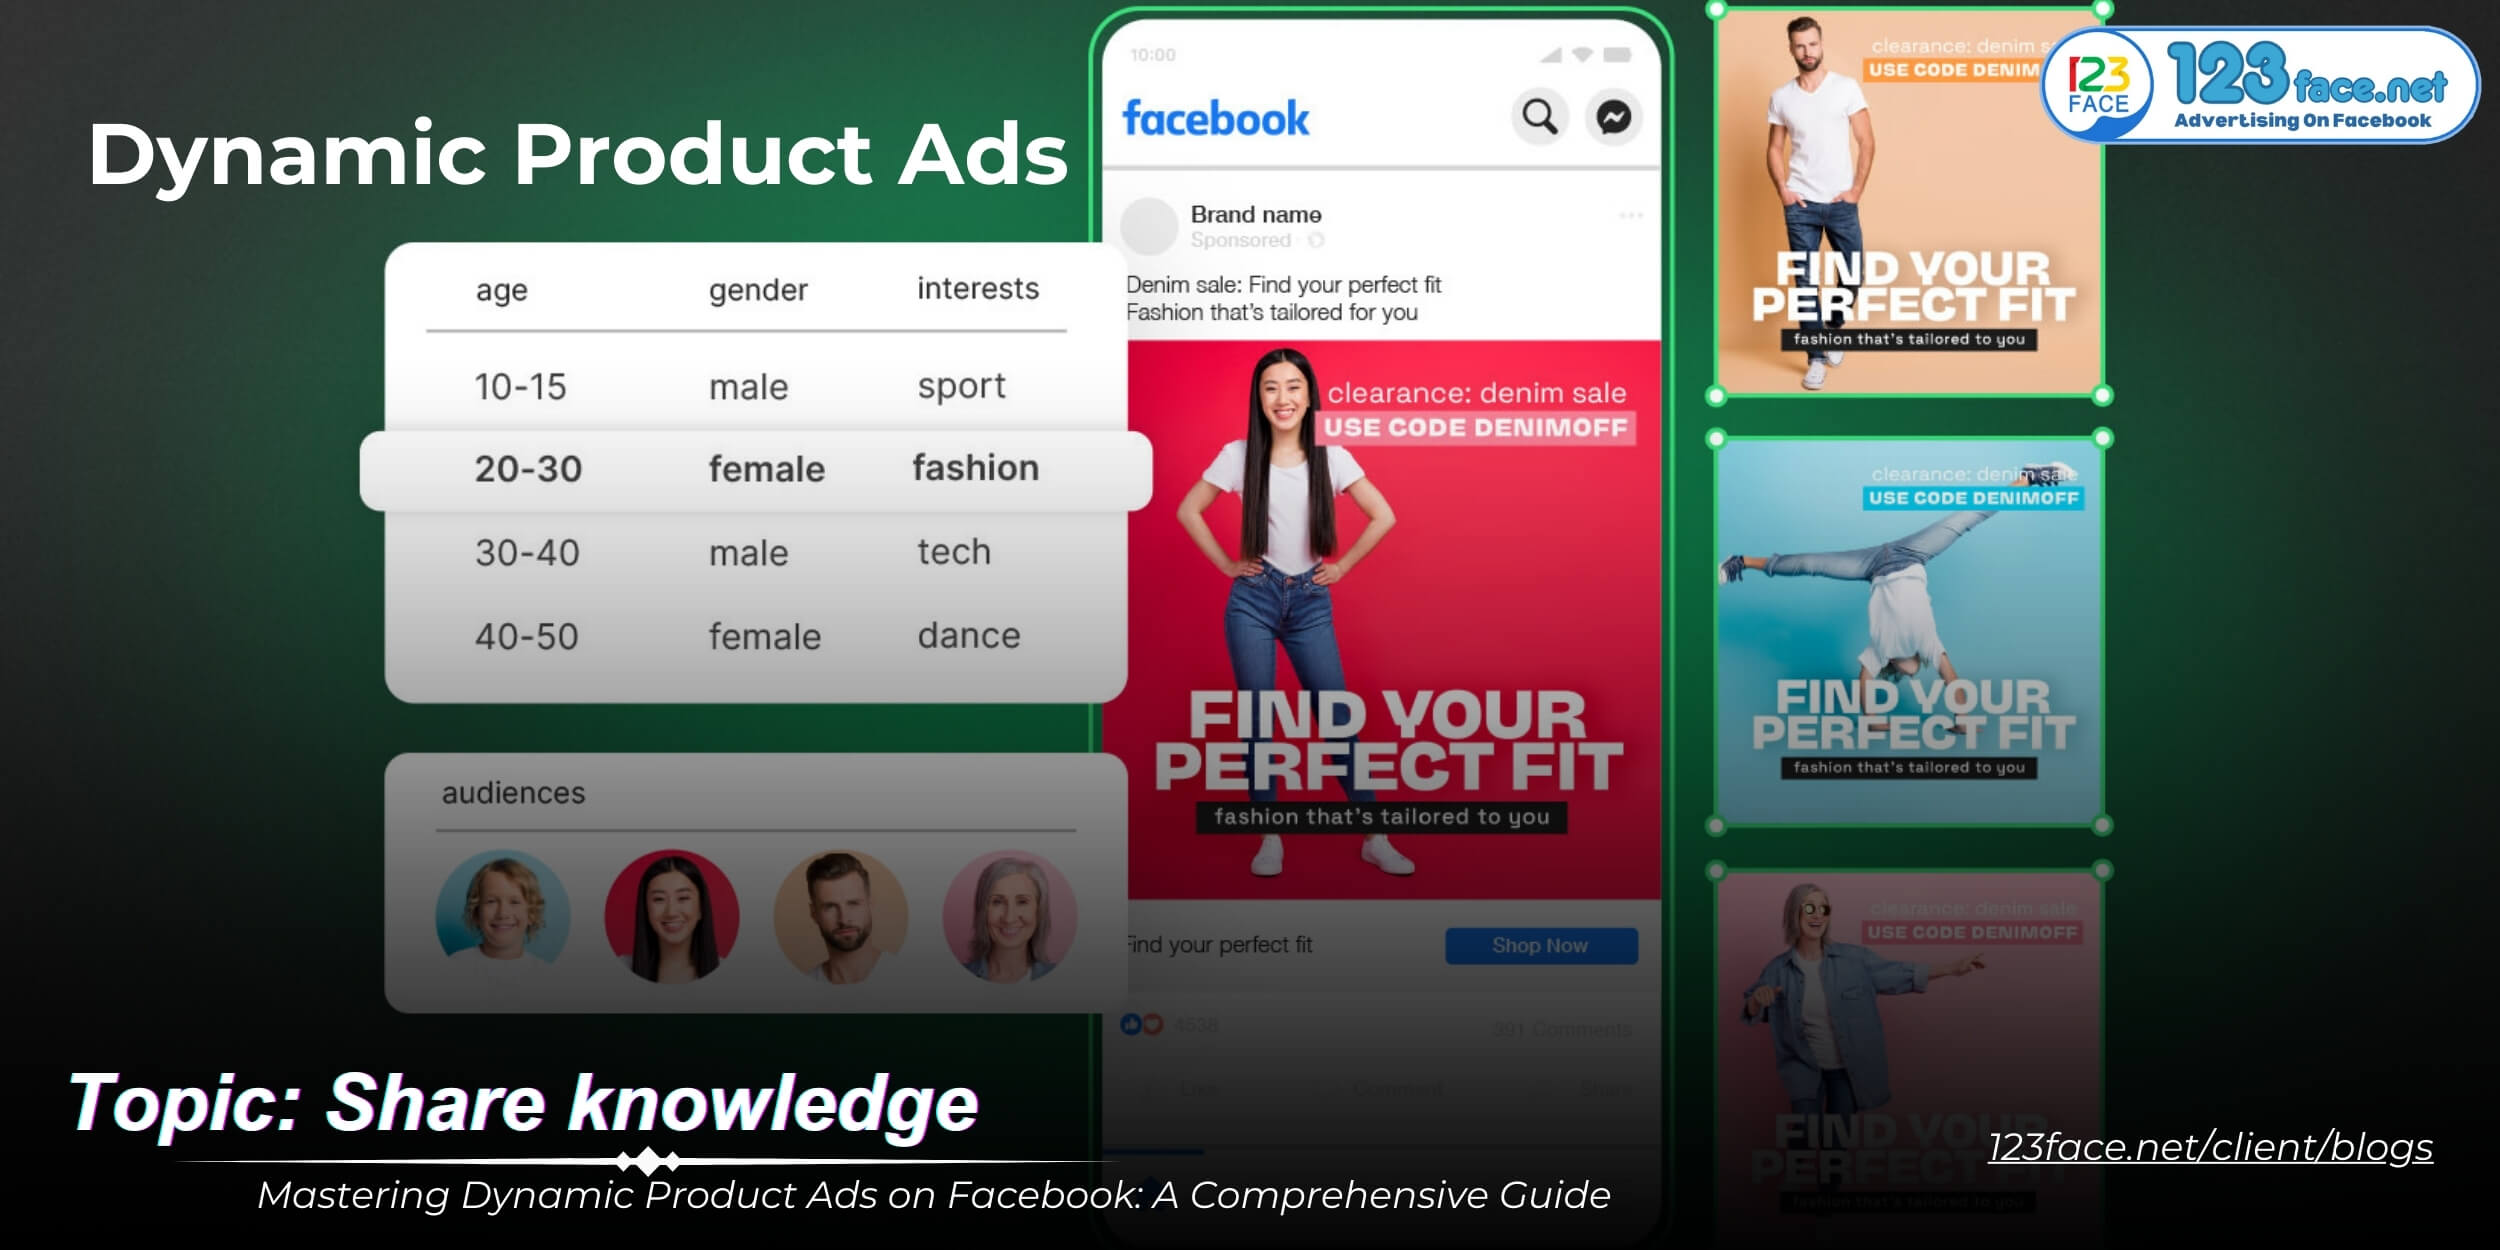 Mastering Dynamic Product Ads on Facebook: A Comprehensive Guide